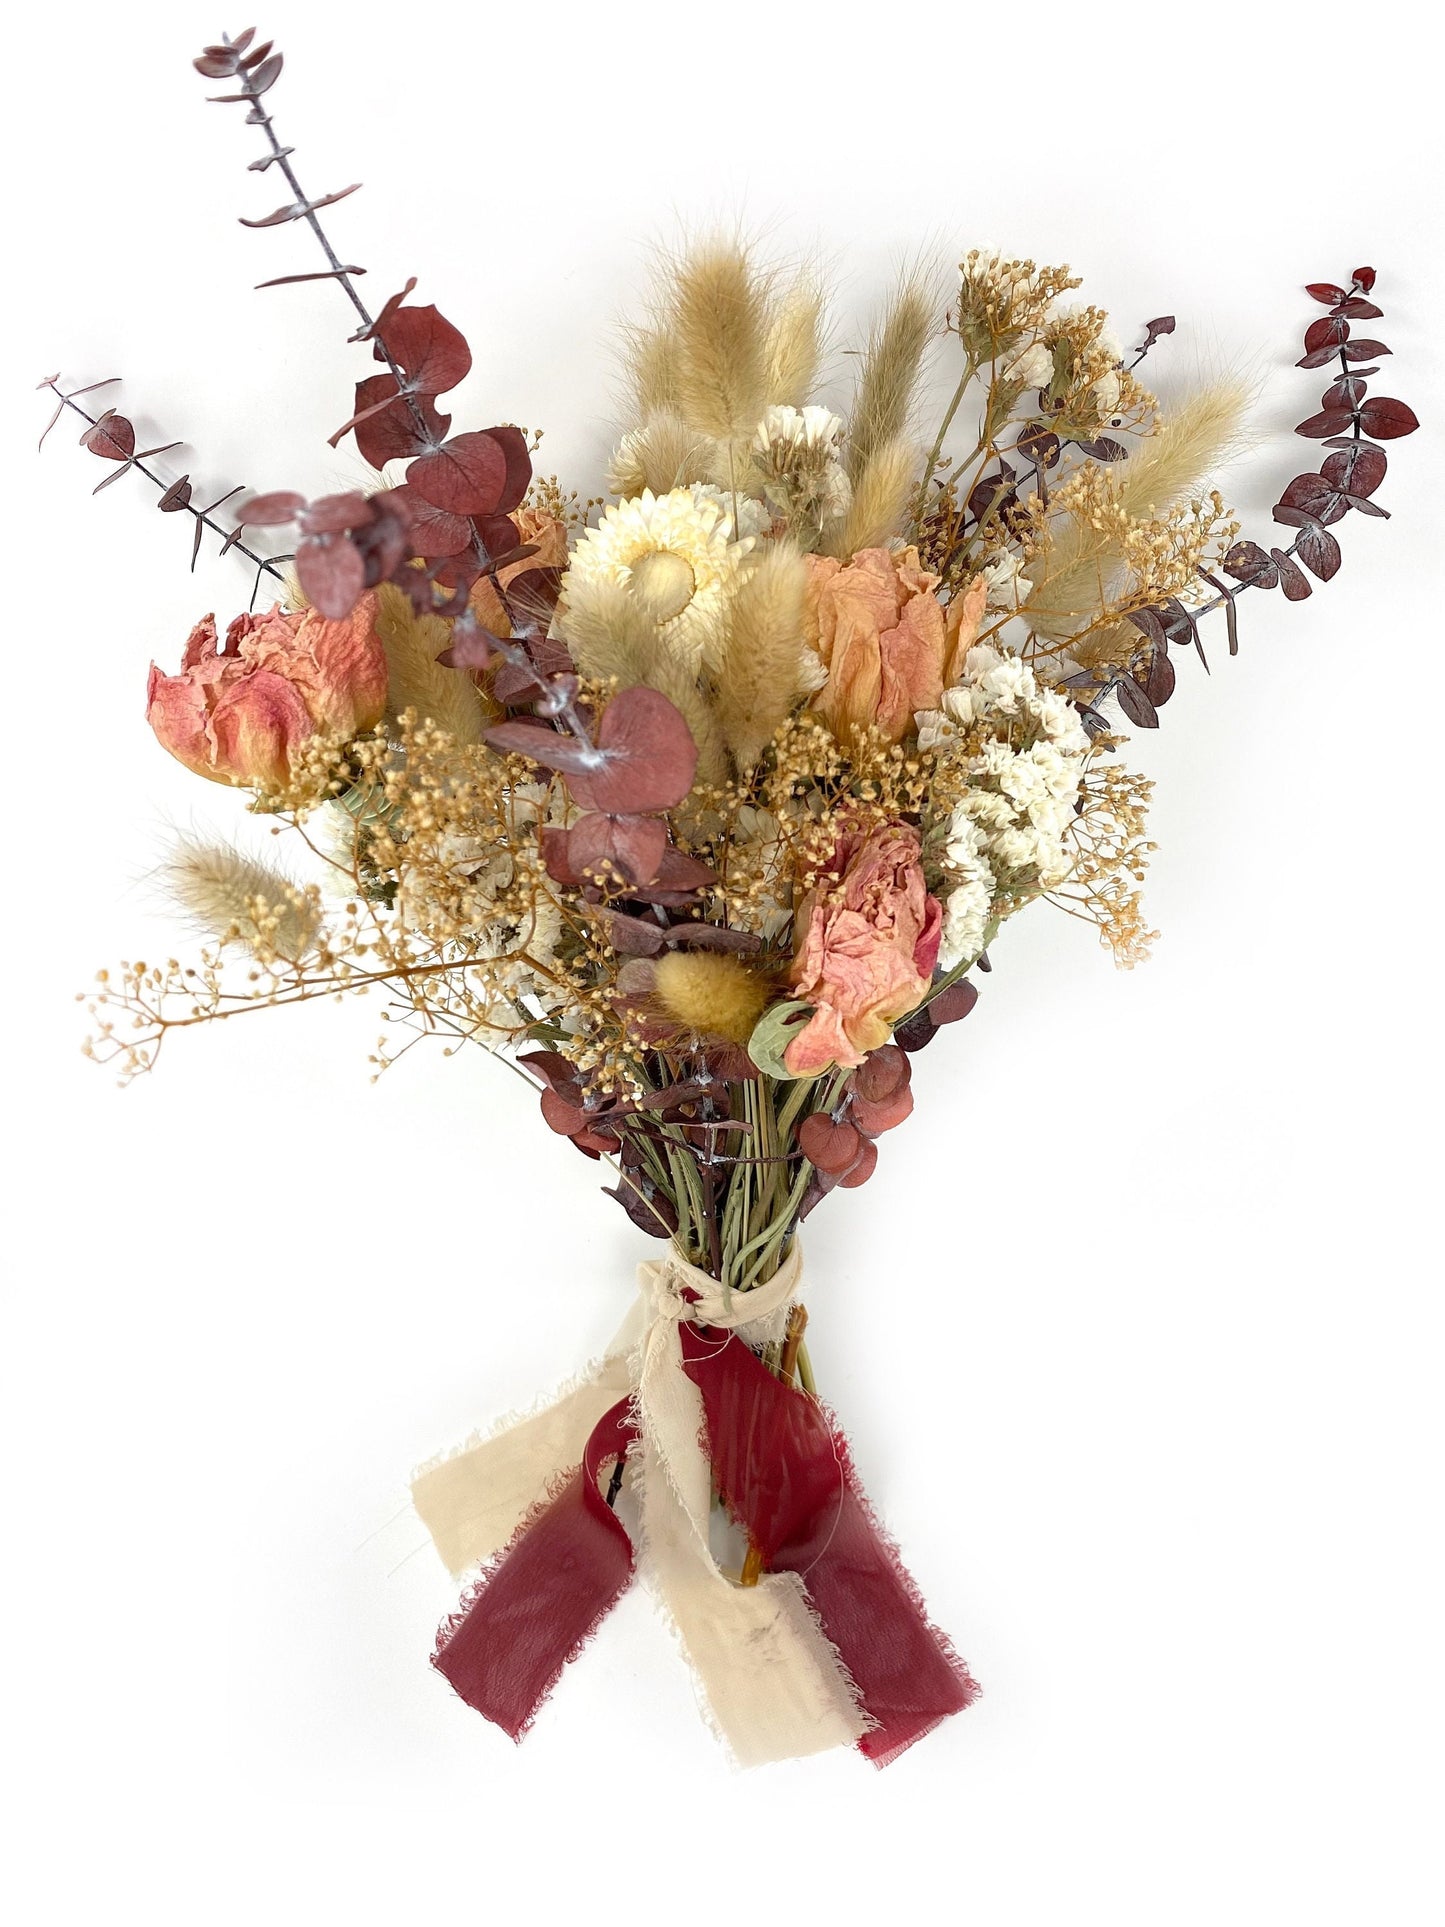 Fall Bouquet, Wedding, Dried Flowers, Majestic, Preserved Floral, Bridal, Ribbon, Neutral Colors, Peonies, Gift Bouquet, Bunny Tails